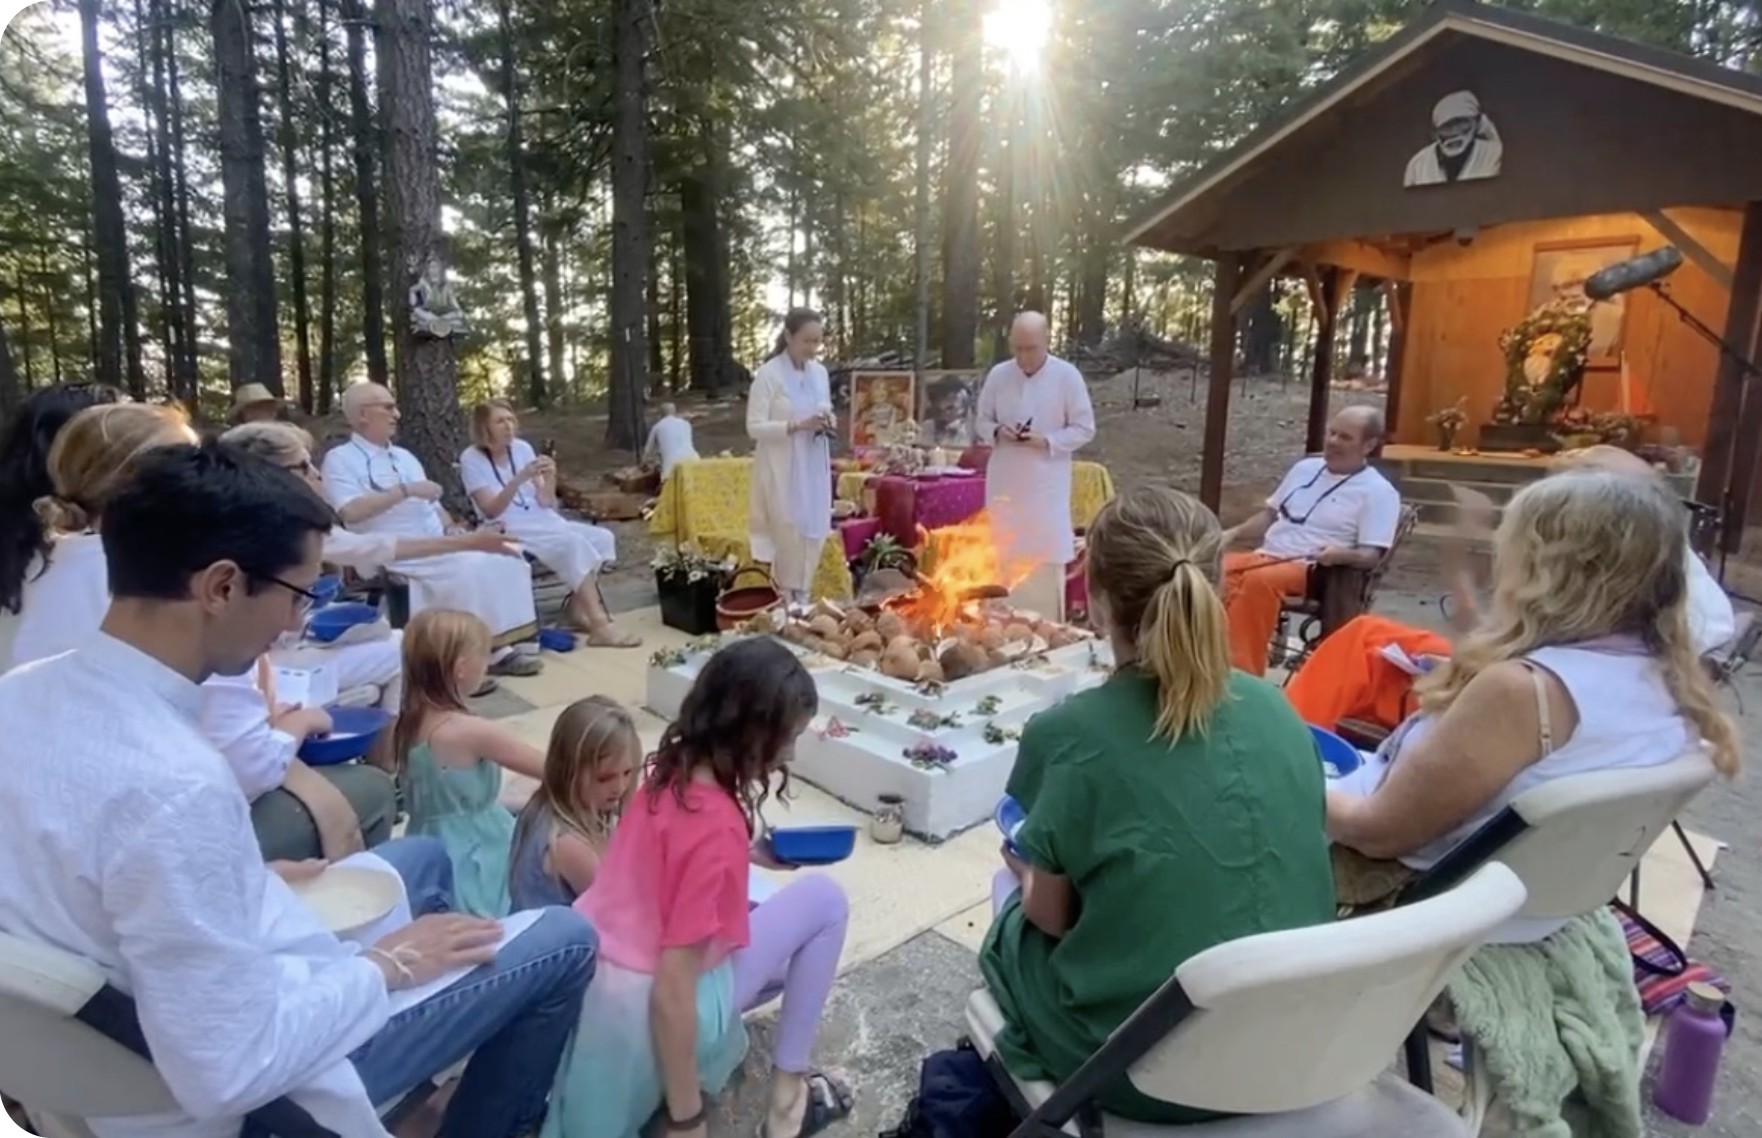 Fire puja generating positive vibrations healing vibrations being performed in nature at the Divine Mother Center